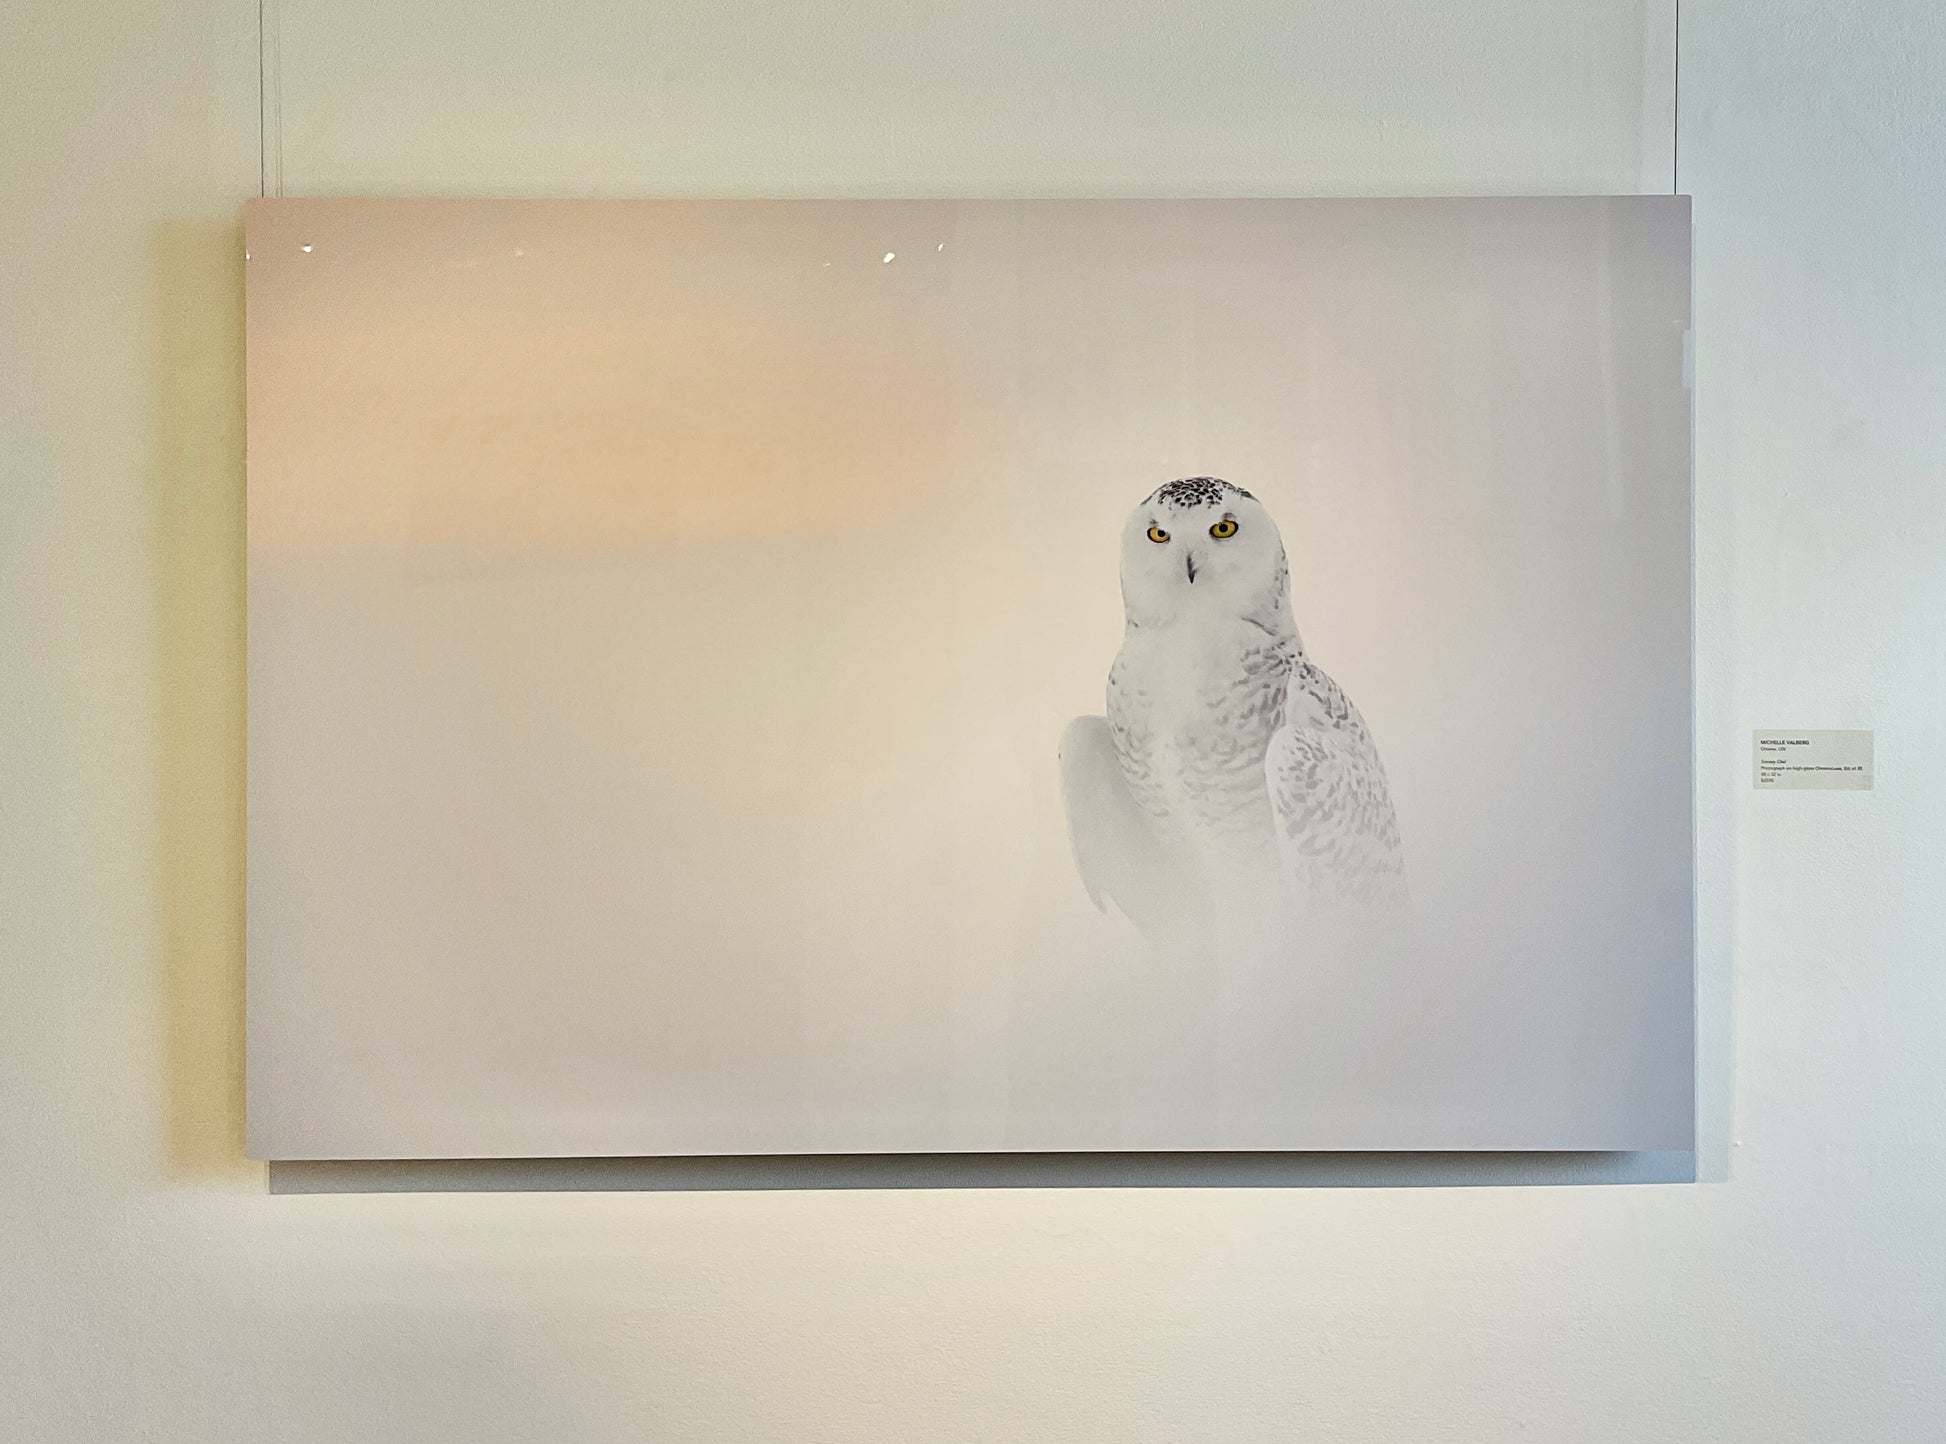 Snowy Owl by Michelle Valberg, printed on Chromaluxe